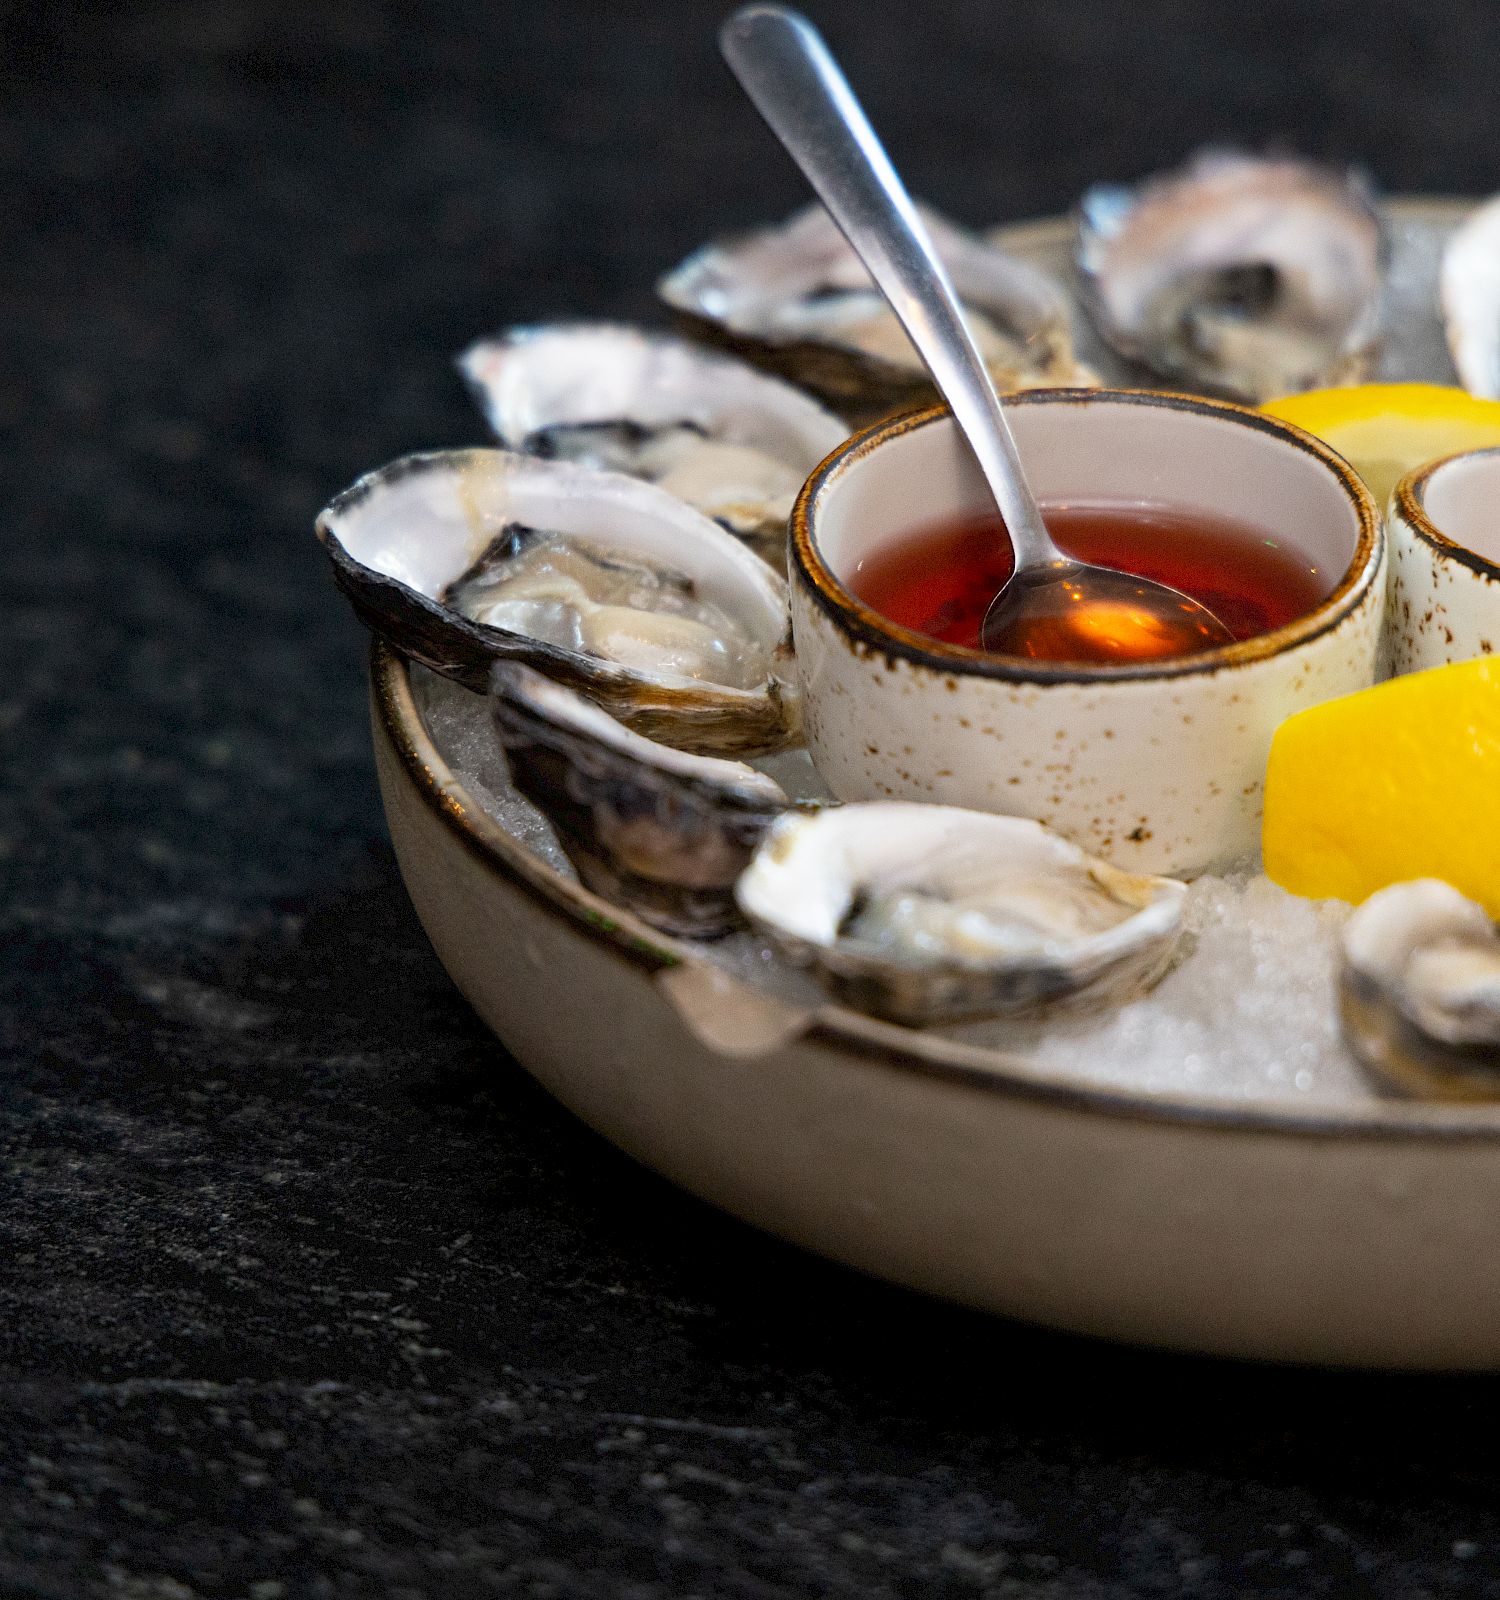 The image shows a dish of oysters on ice, accompanied by lemon wedges and two sauces in small bowls with spoons.